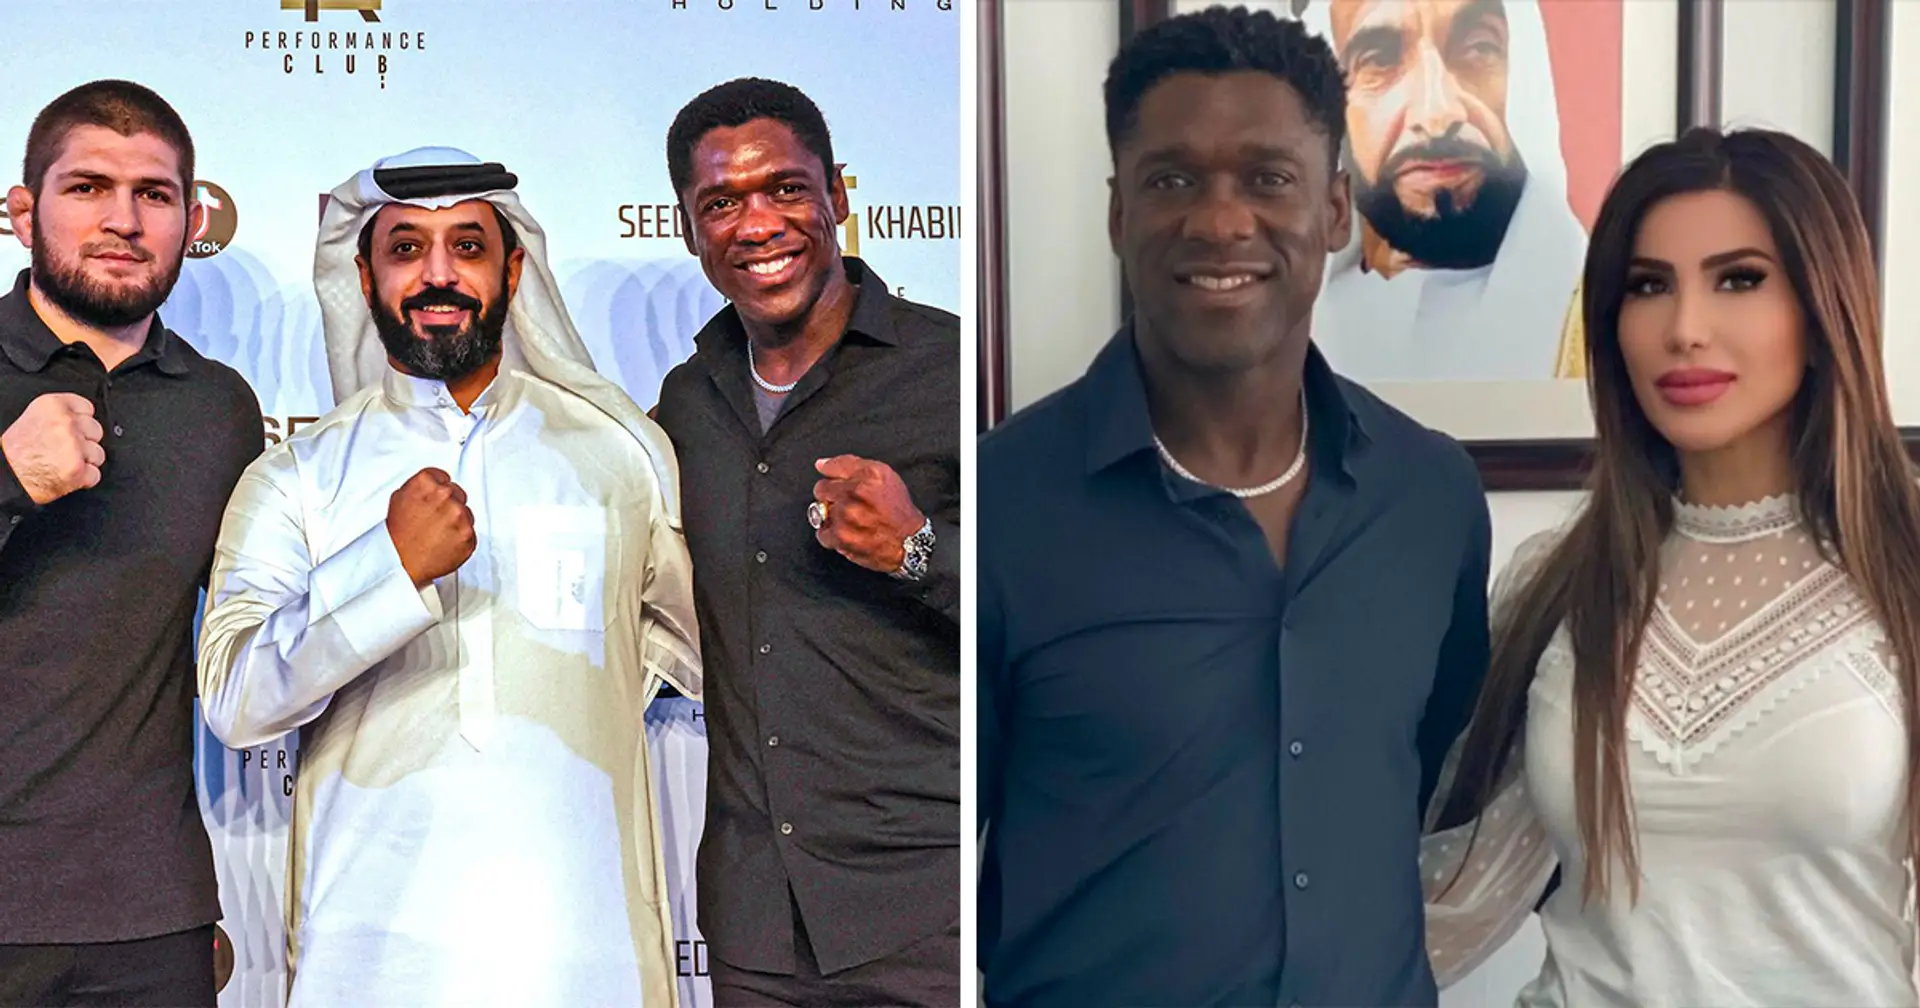 Dutch legend Clarence Seedorf confirms conversion to Islam